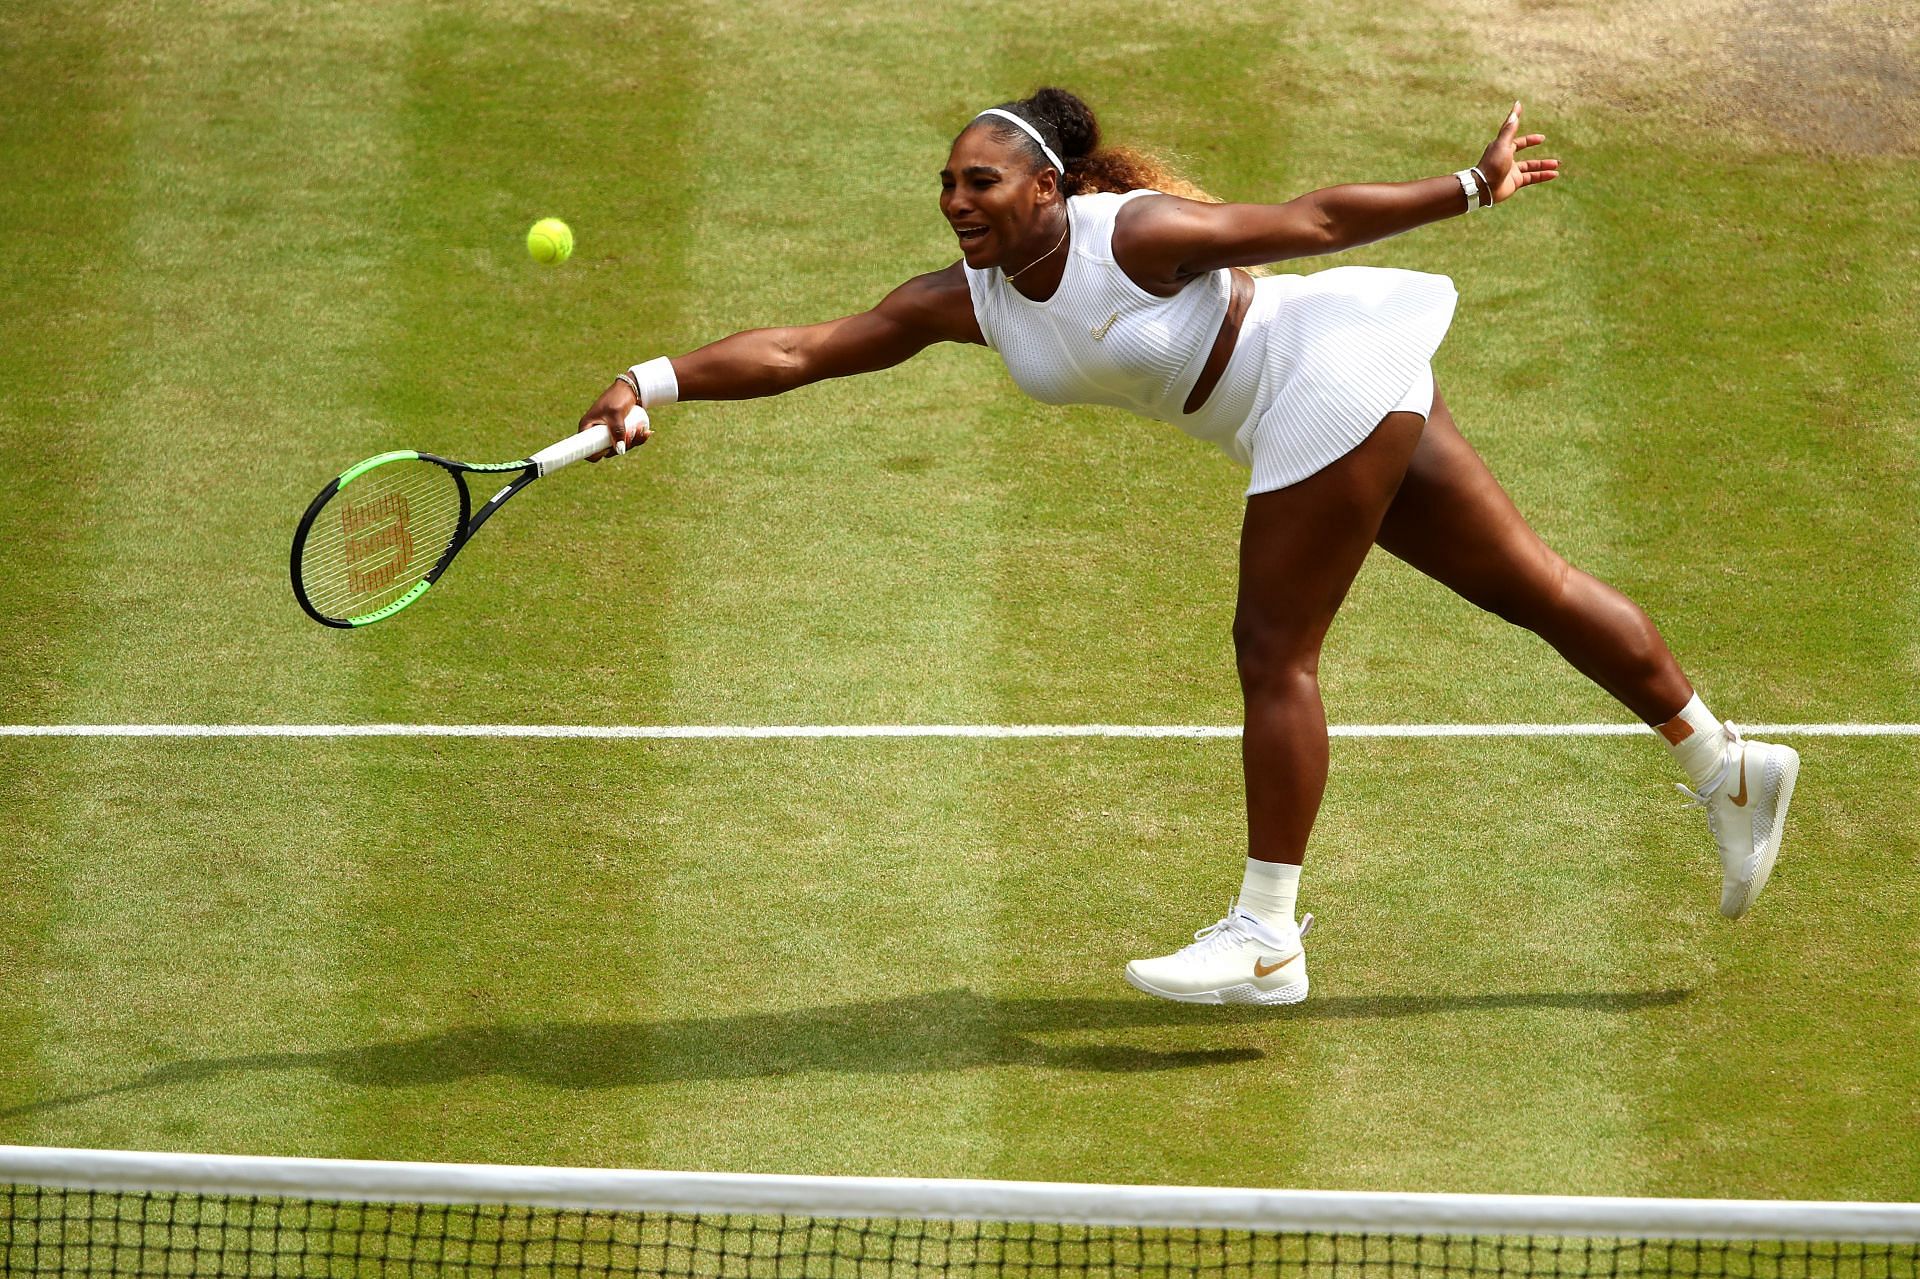 Williams will be playing in her first match in 12 months